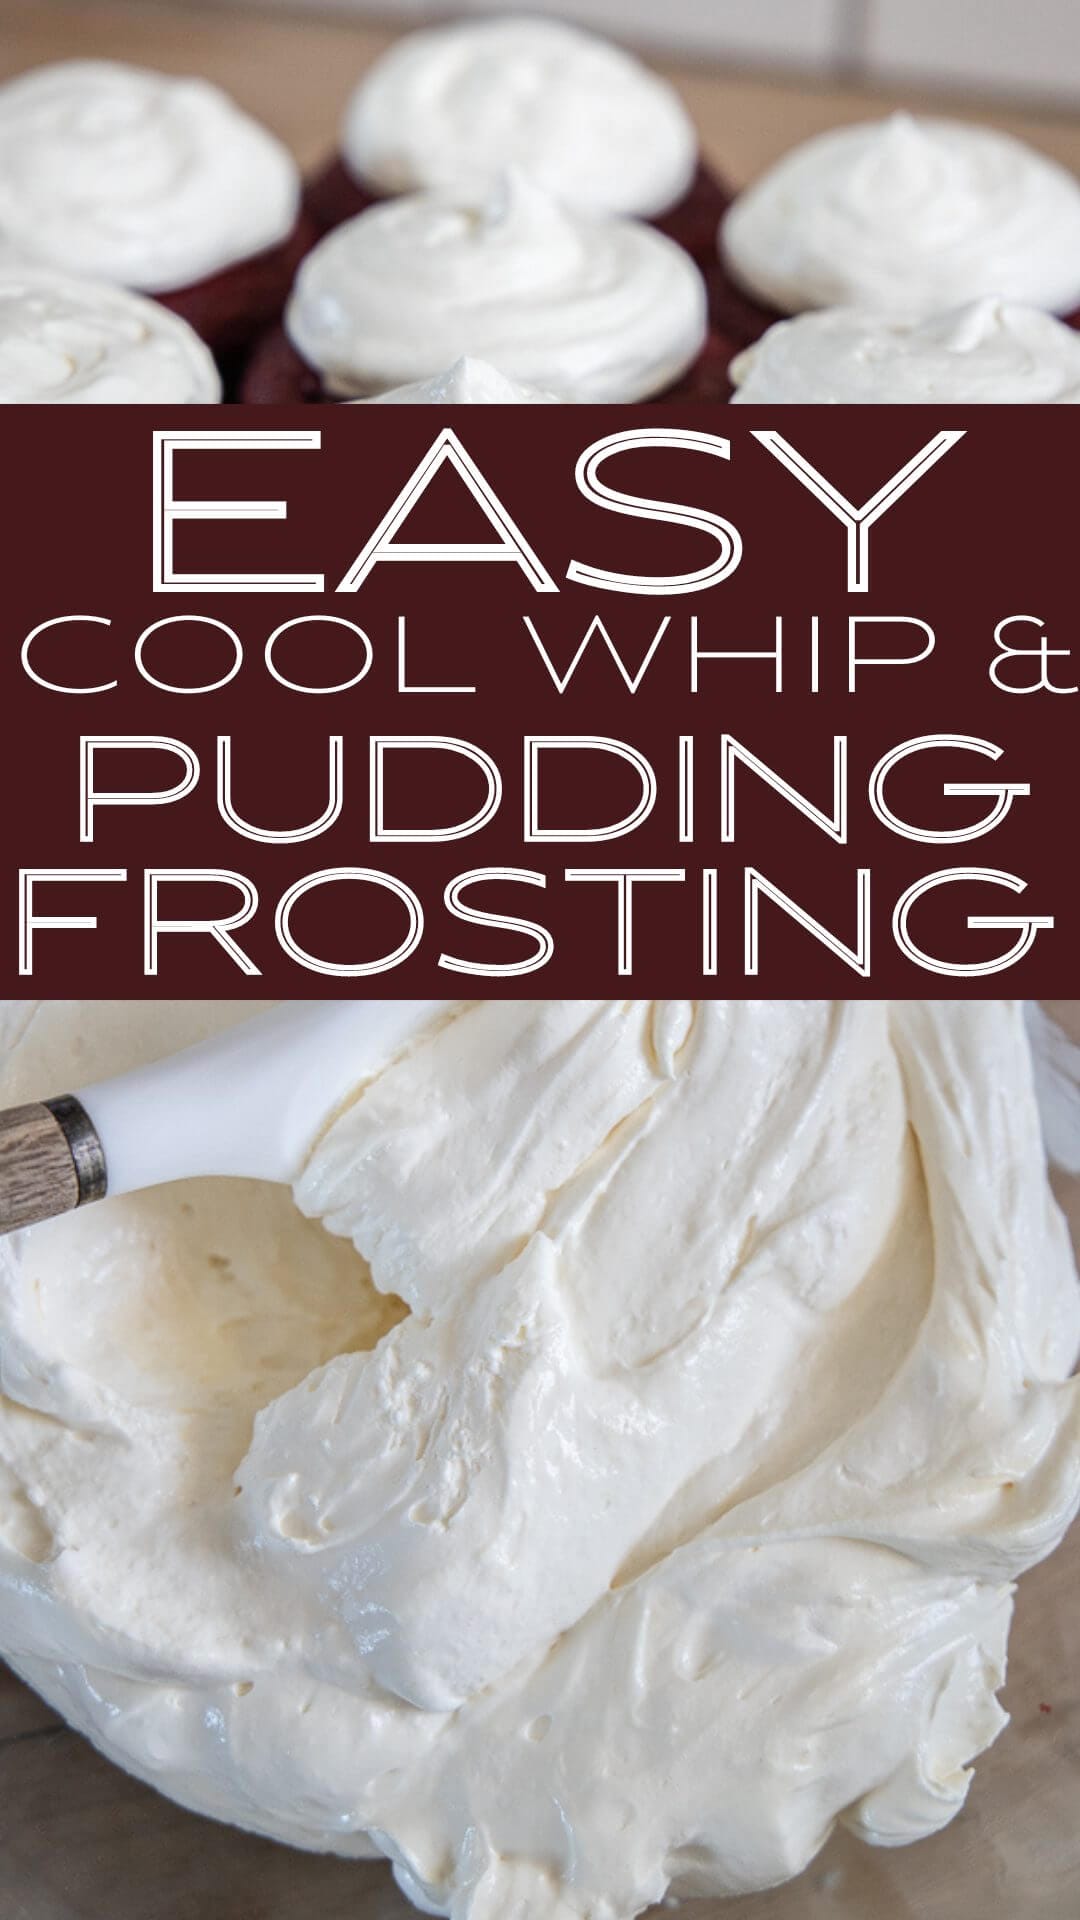 How to make this easy and versatile cool whip frosting. This is a great alternative to traditional frostings and is perfect on cupcakes and cakes!